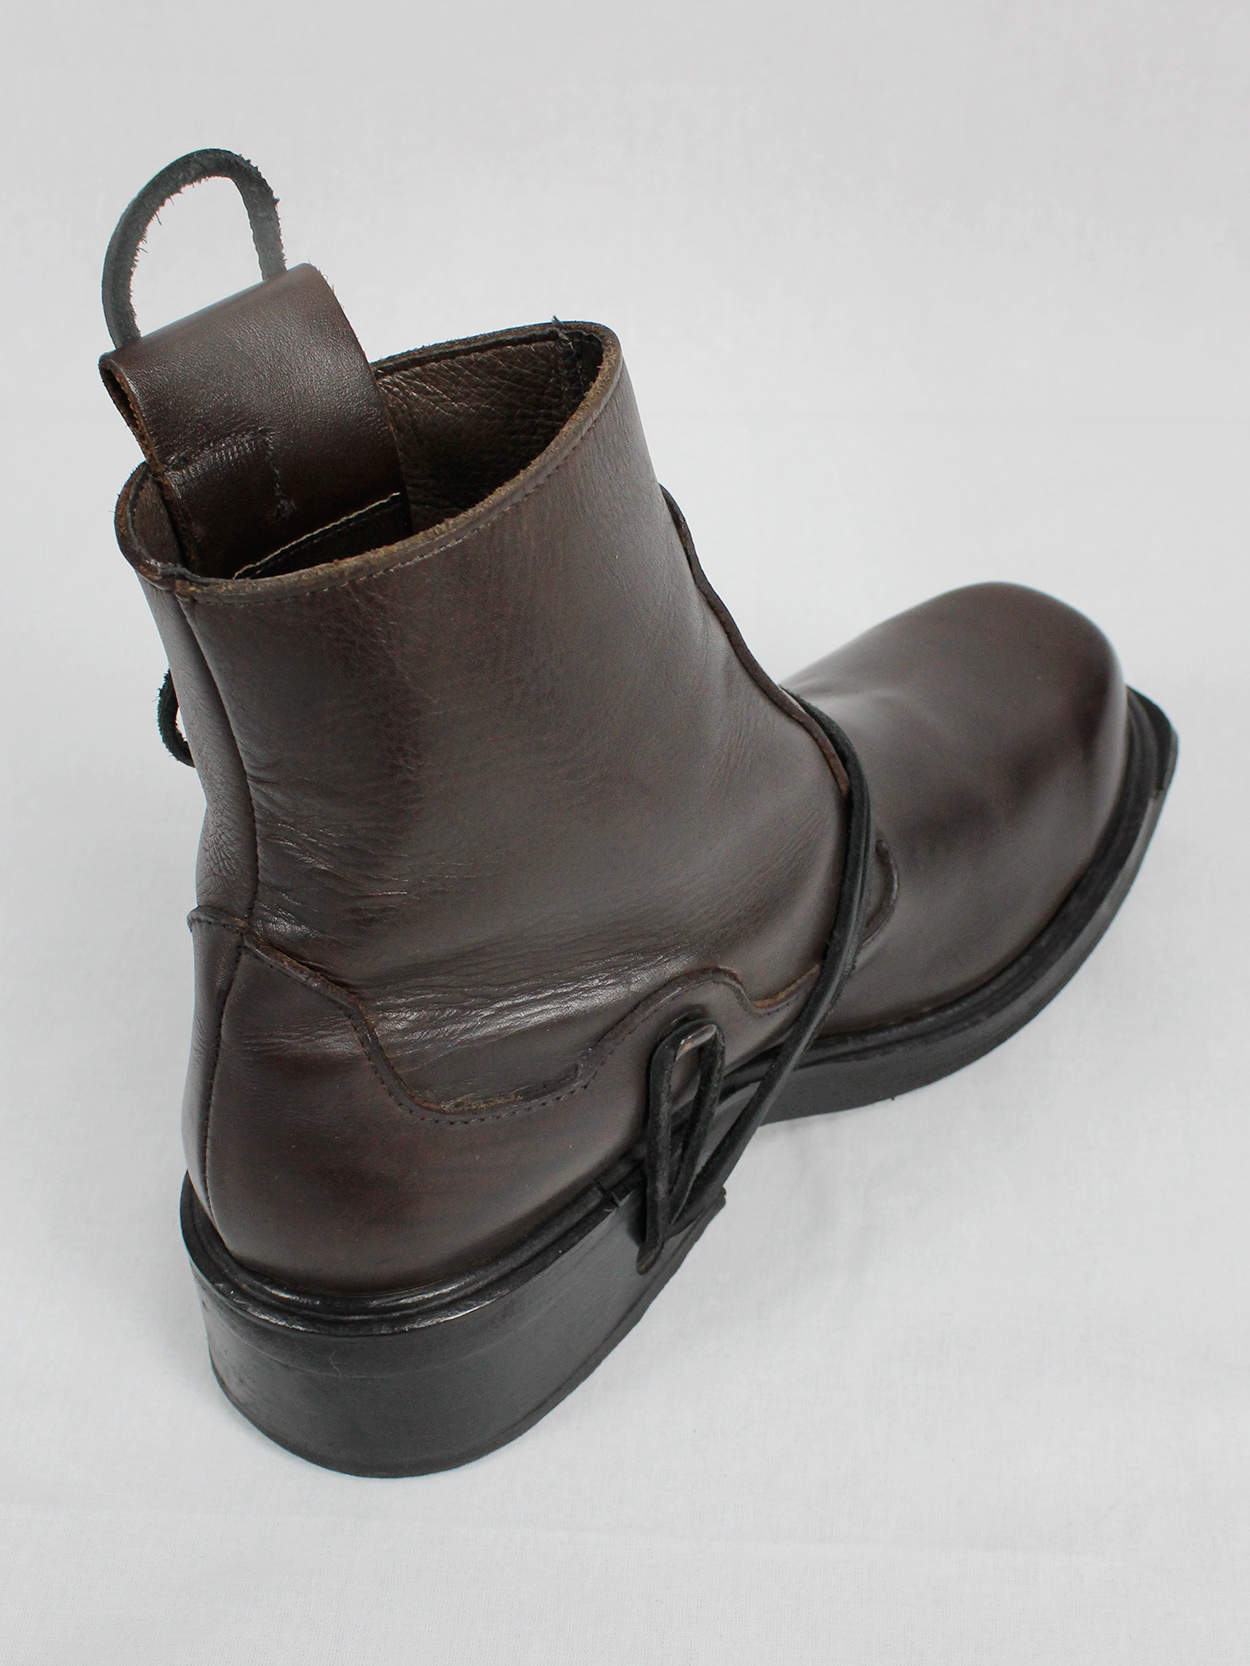 vaniitas Dirk Bikkembergs brown boots with hooks and laces through the soles 44 90s 1990s (11)